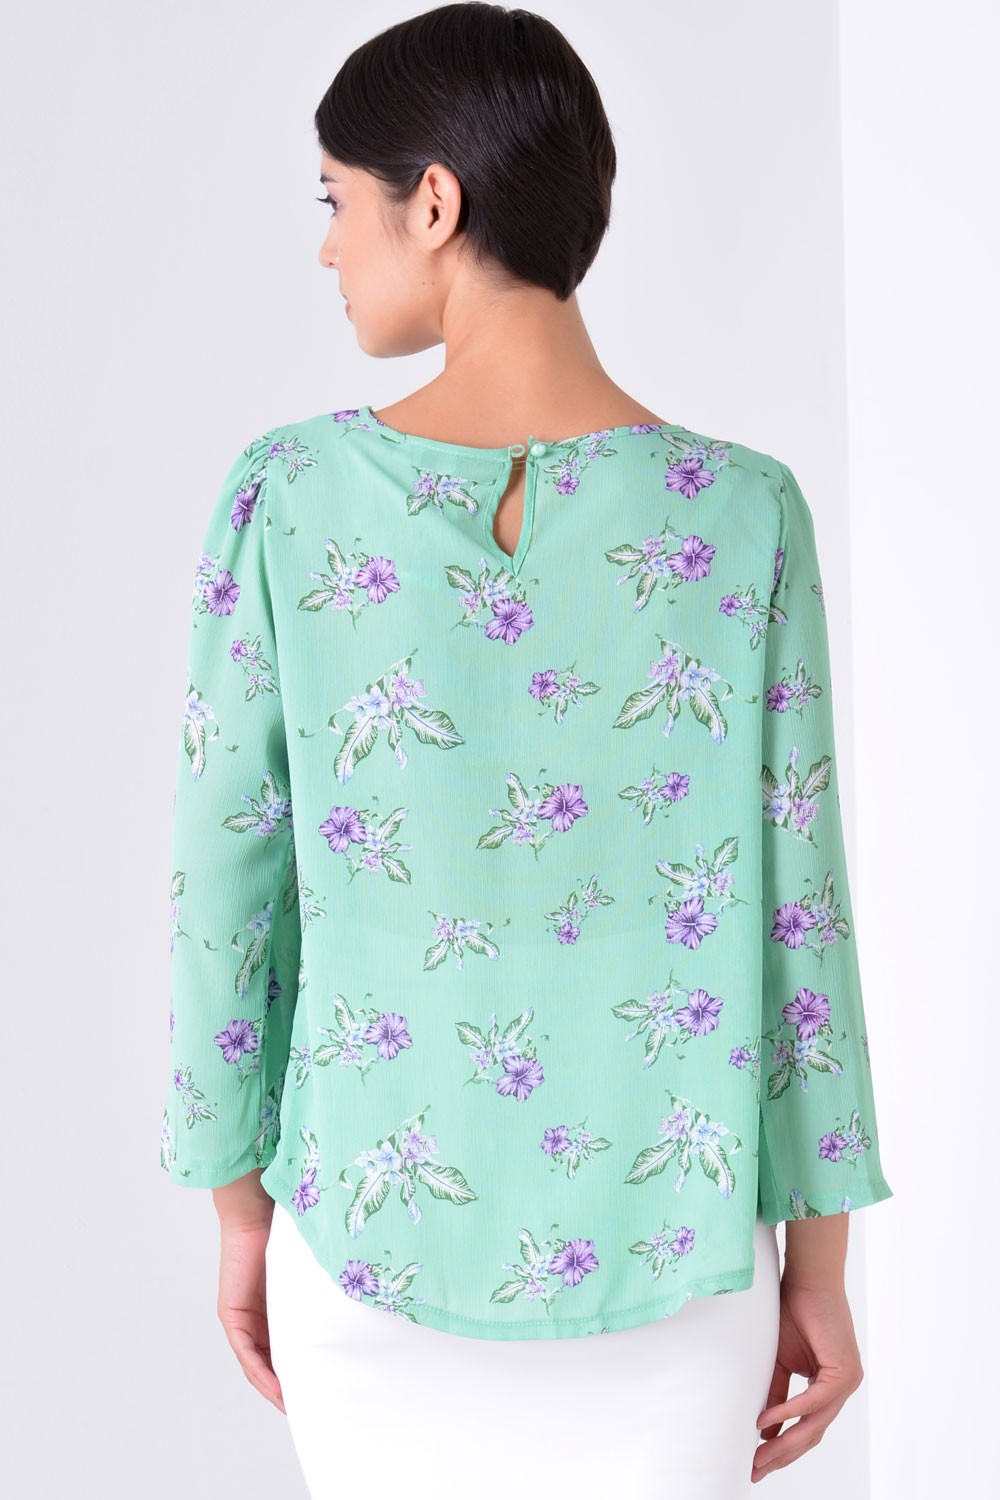 Marc Angelo Christy Chiffon Floral Top in Mint | iCLOTHING